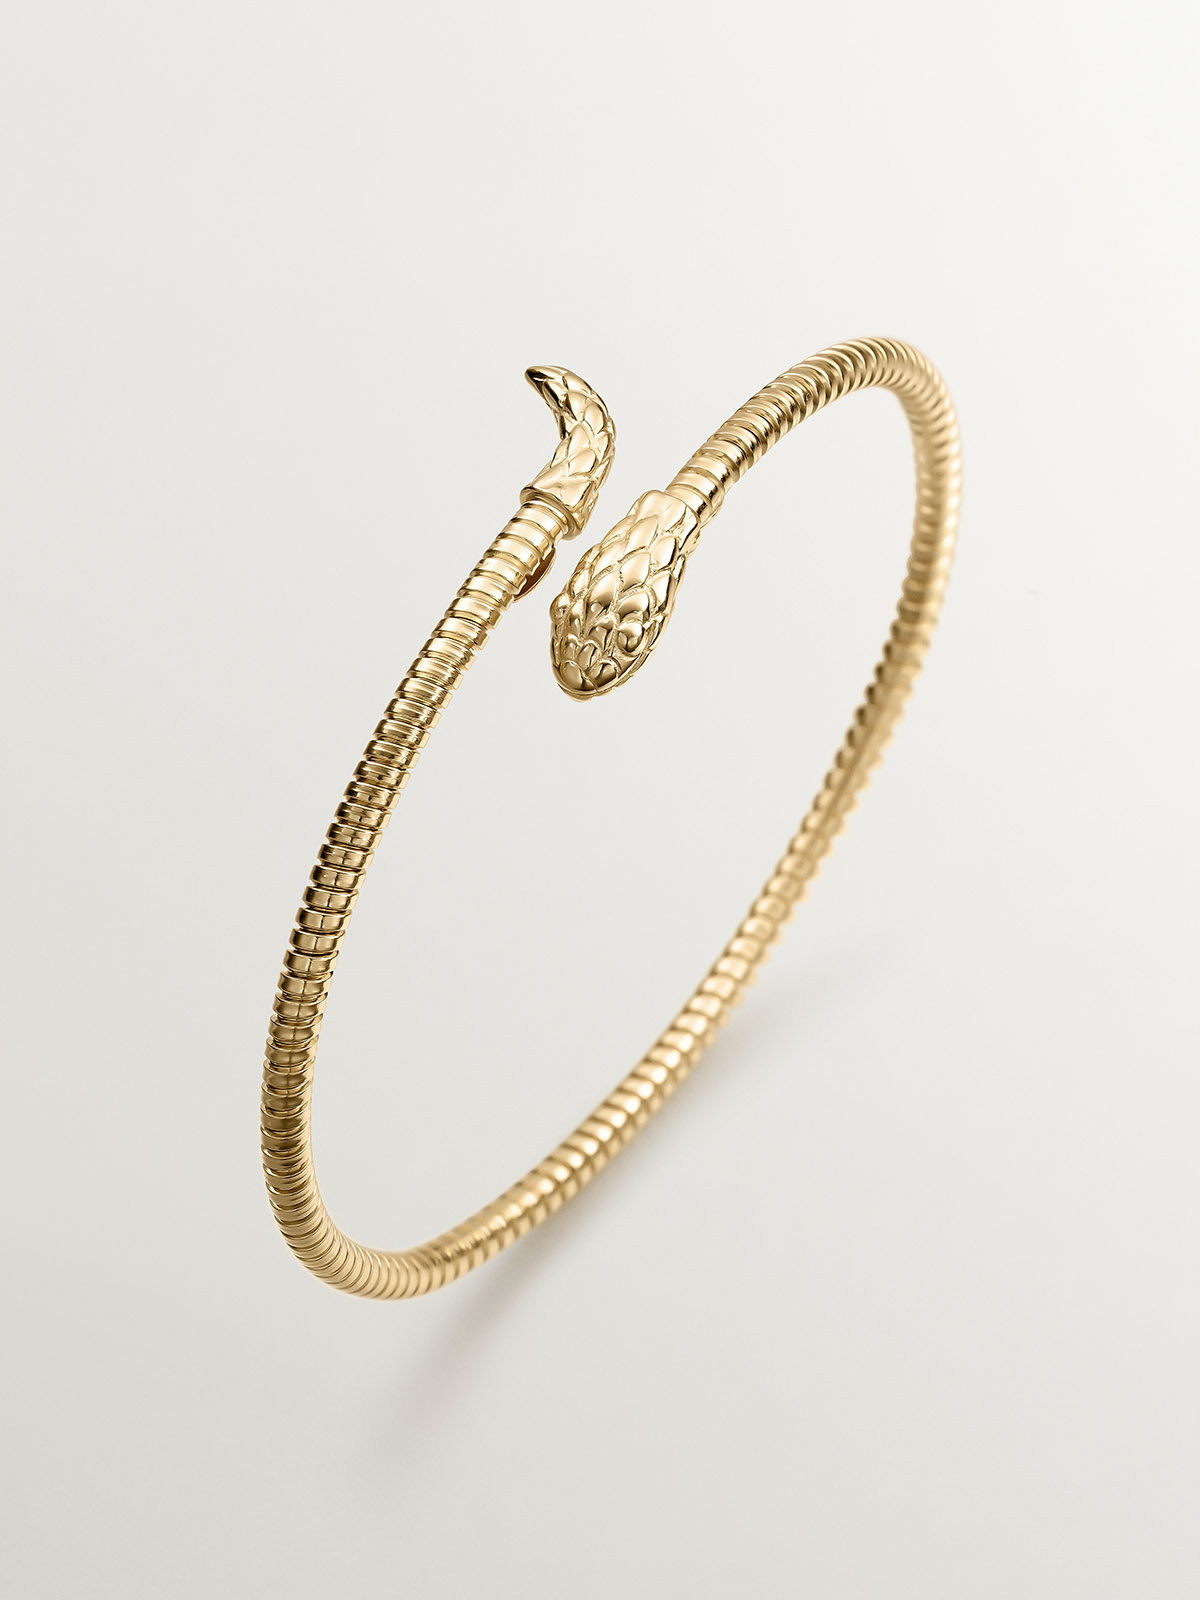 925 Silver bracelet bathed in 18K yellow gold with a snake design.